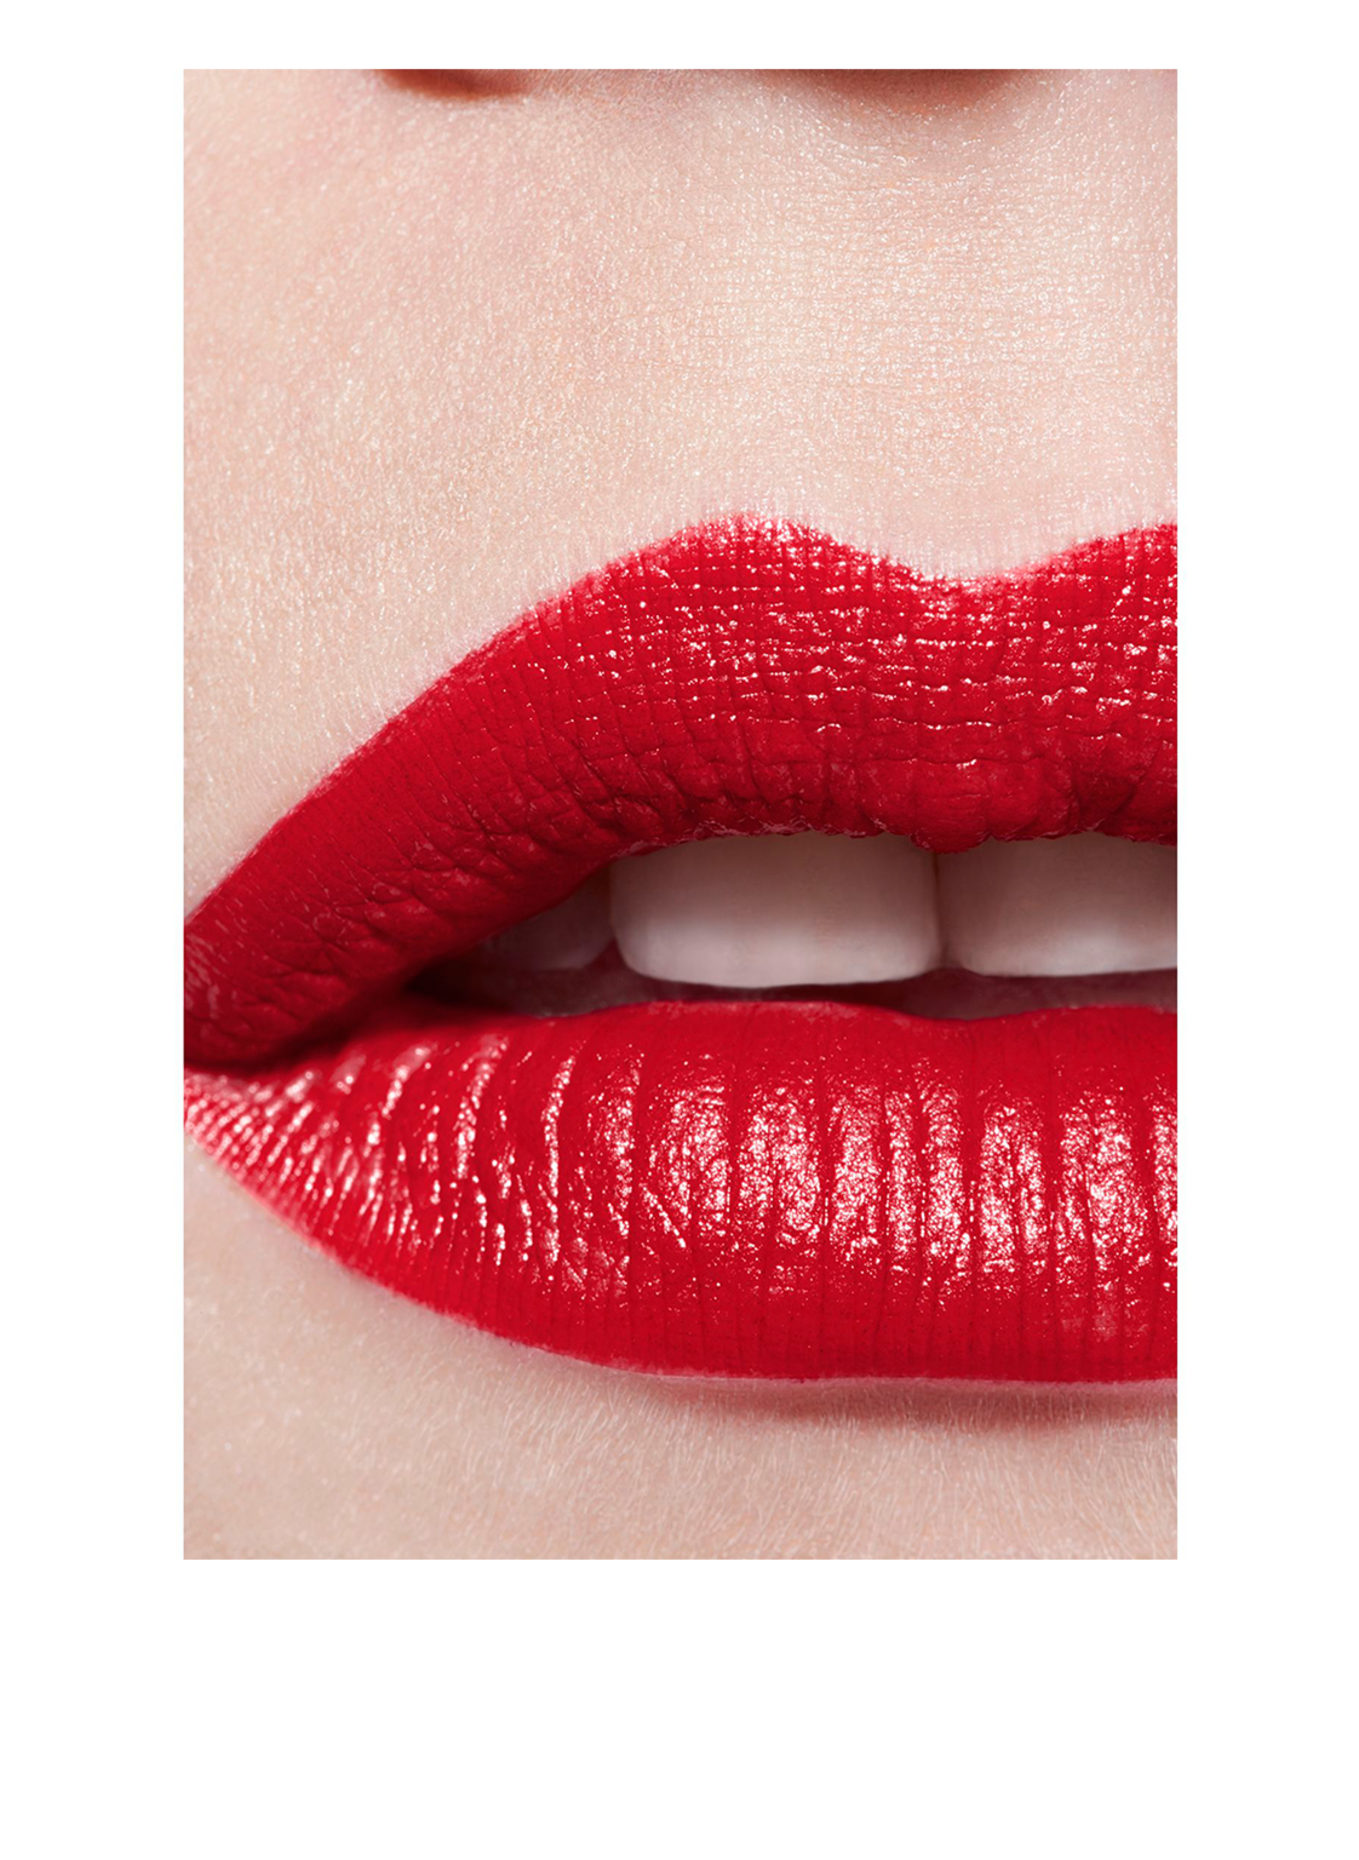 CHANEL ROUGE ALLURE L'EXTRAIT EXKLUSIVKREATION, Farbe: 854 ROUGE PUISSANT (Bild 3)